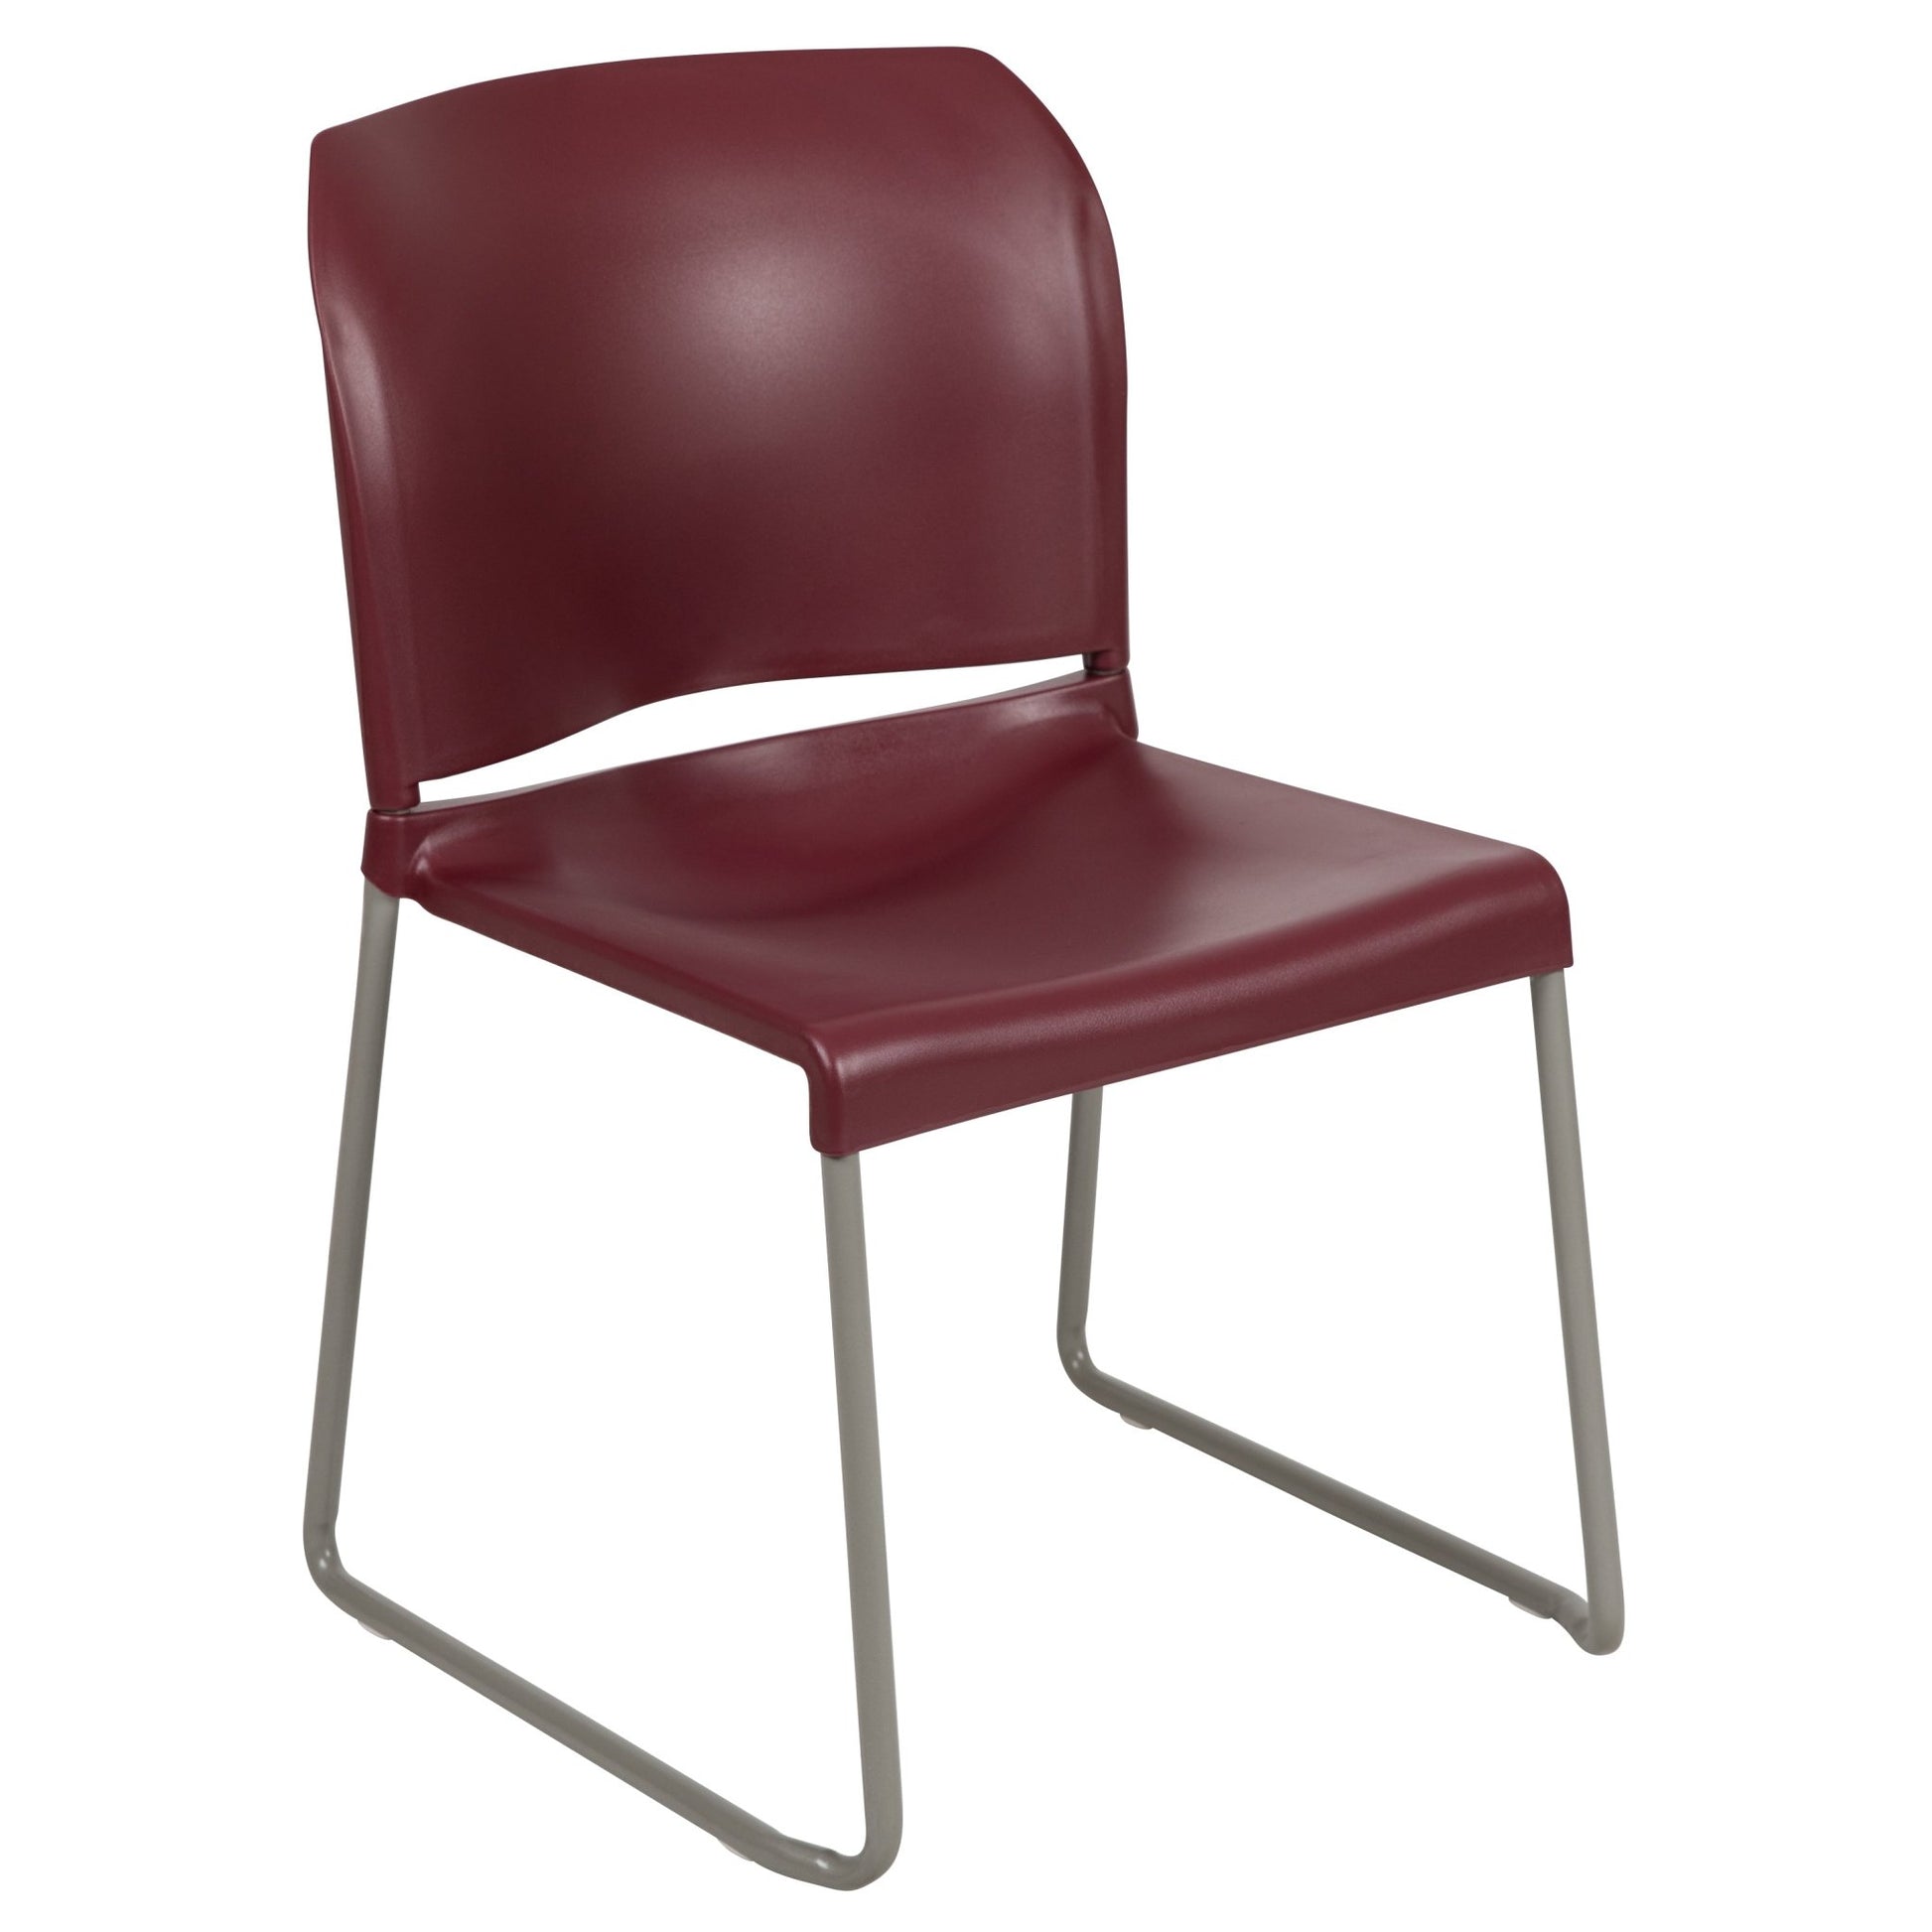 HERCULES Series 880 lb. Capacity Full Back Contoured Stack Chair with Powder Coated Sled Base - SchoolOutlet